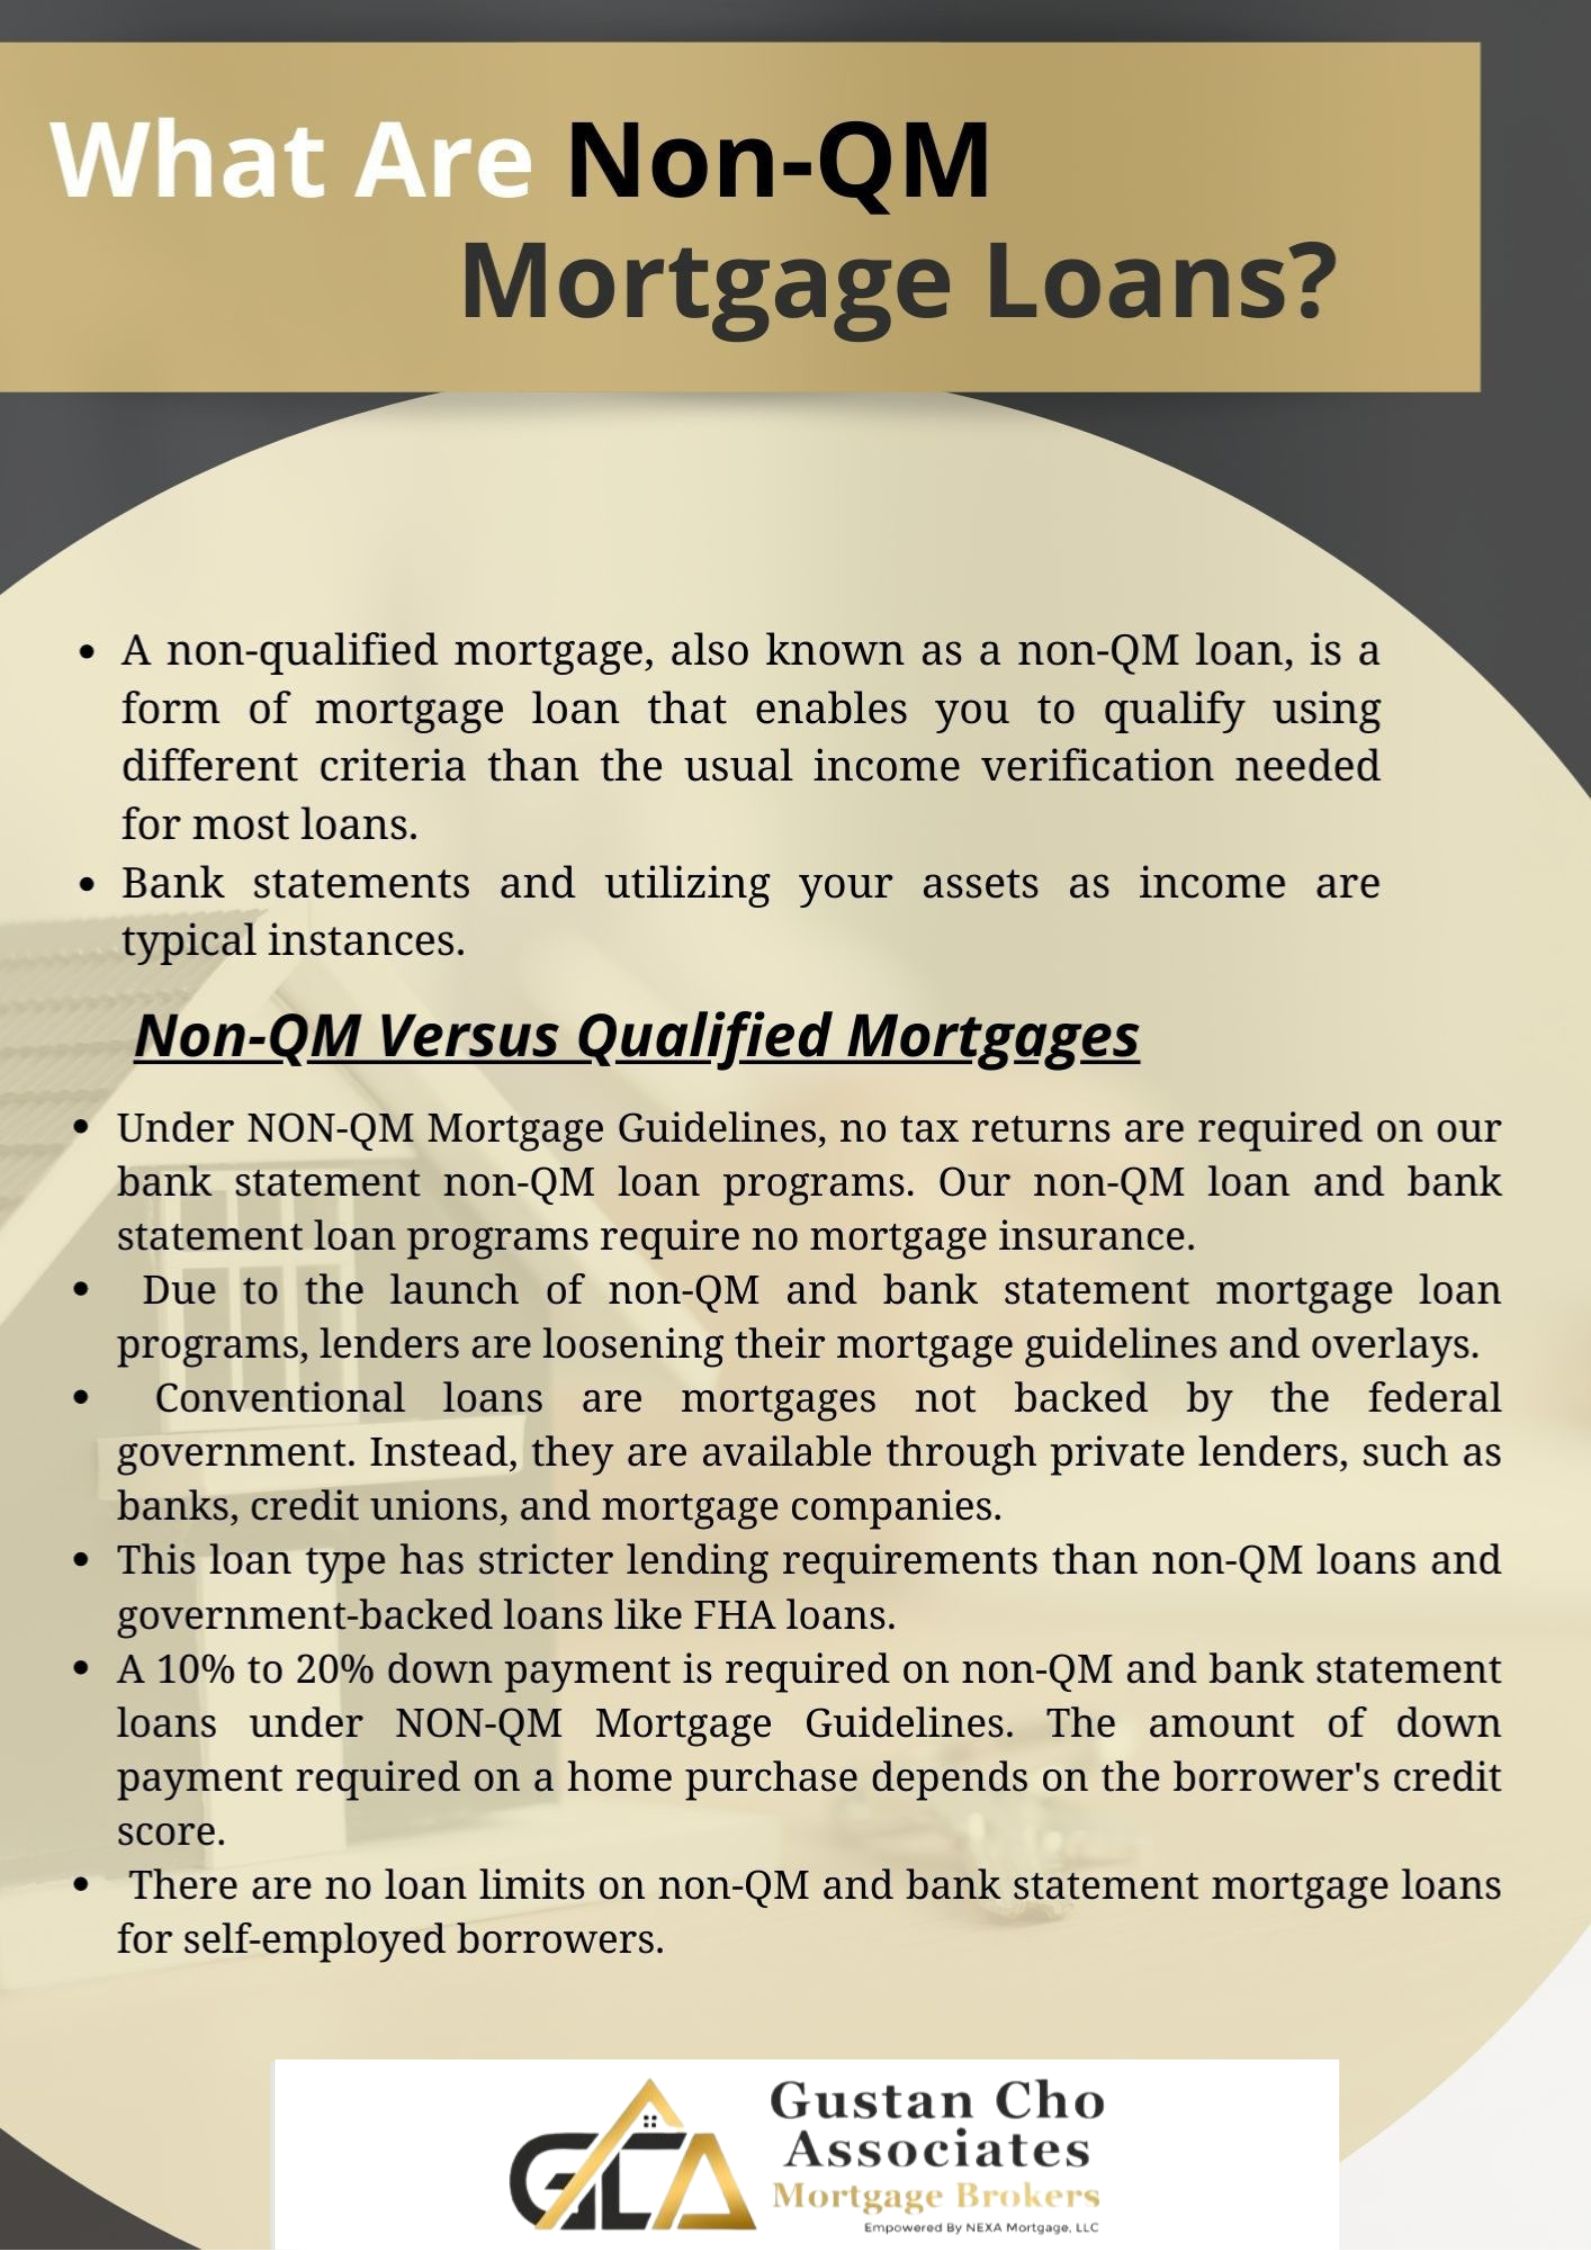 NON-QM Mortgage Guidelines on Non-Conforming Loans